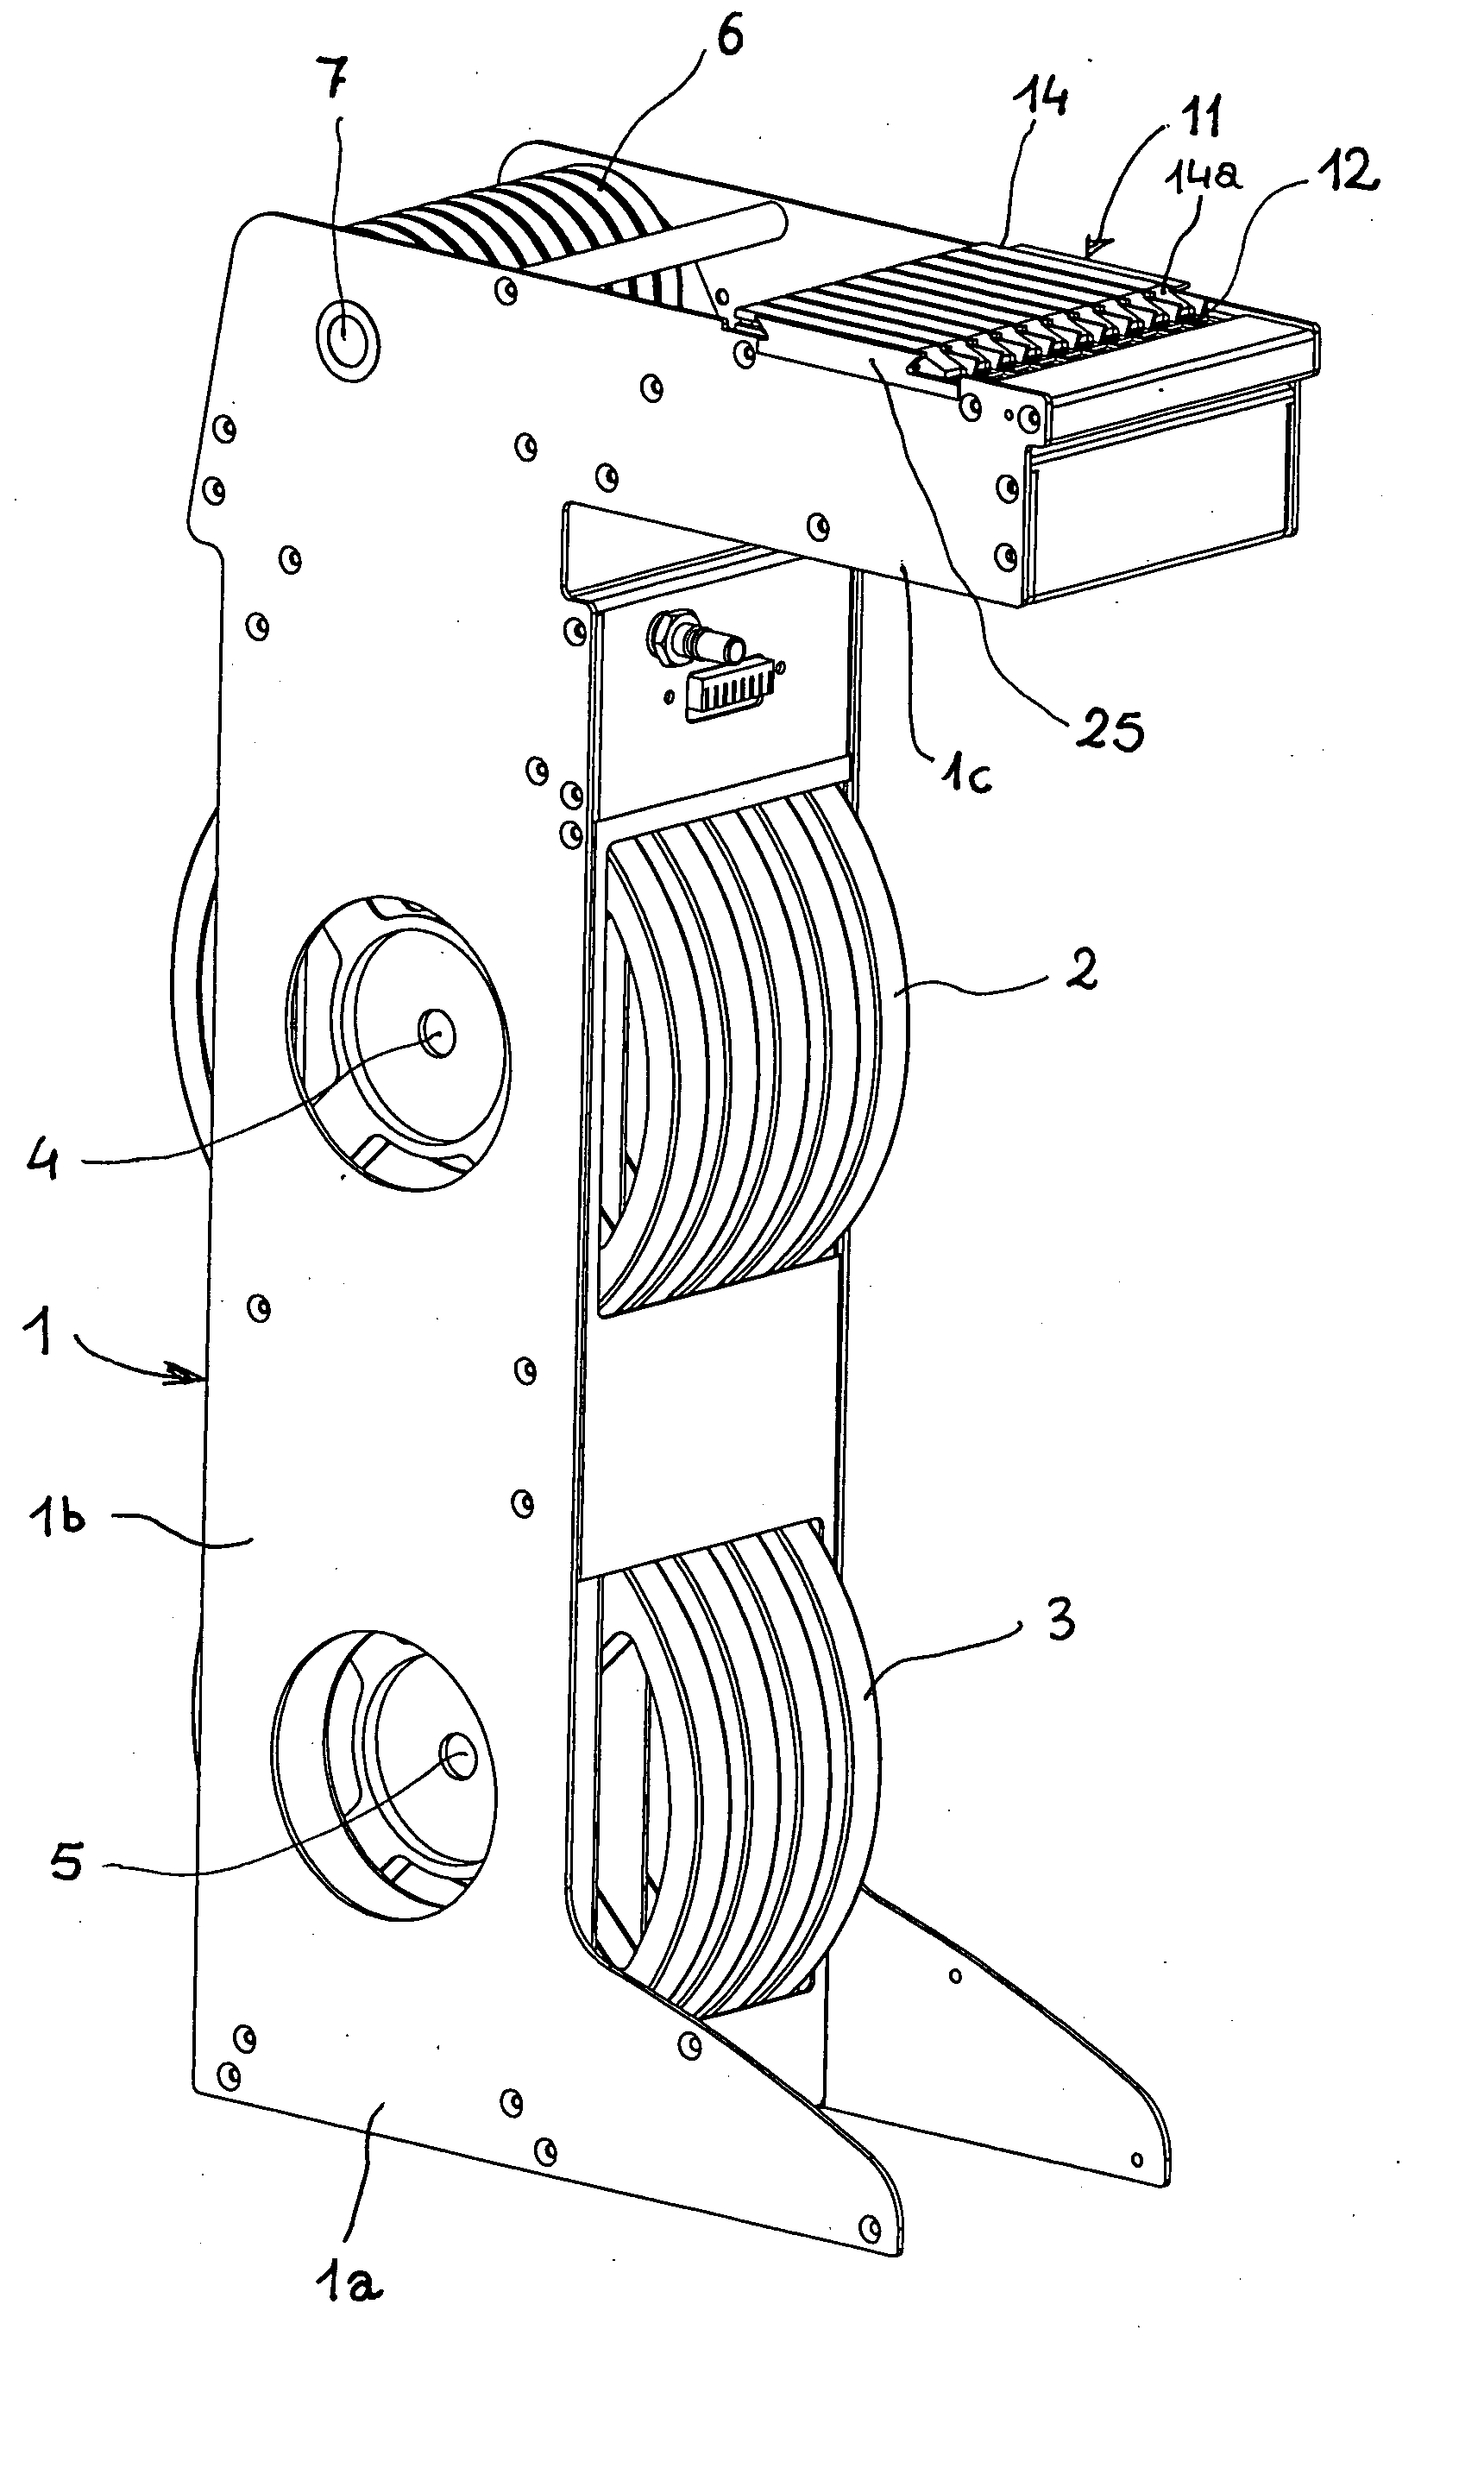 Linear multiple feeder for automatic surface-mounting device positioning apparatuses